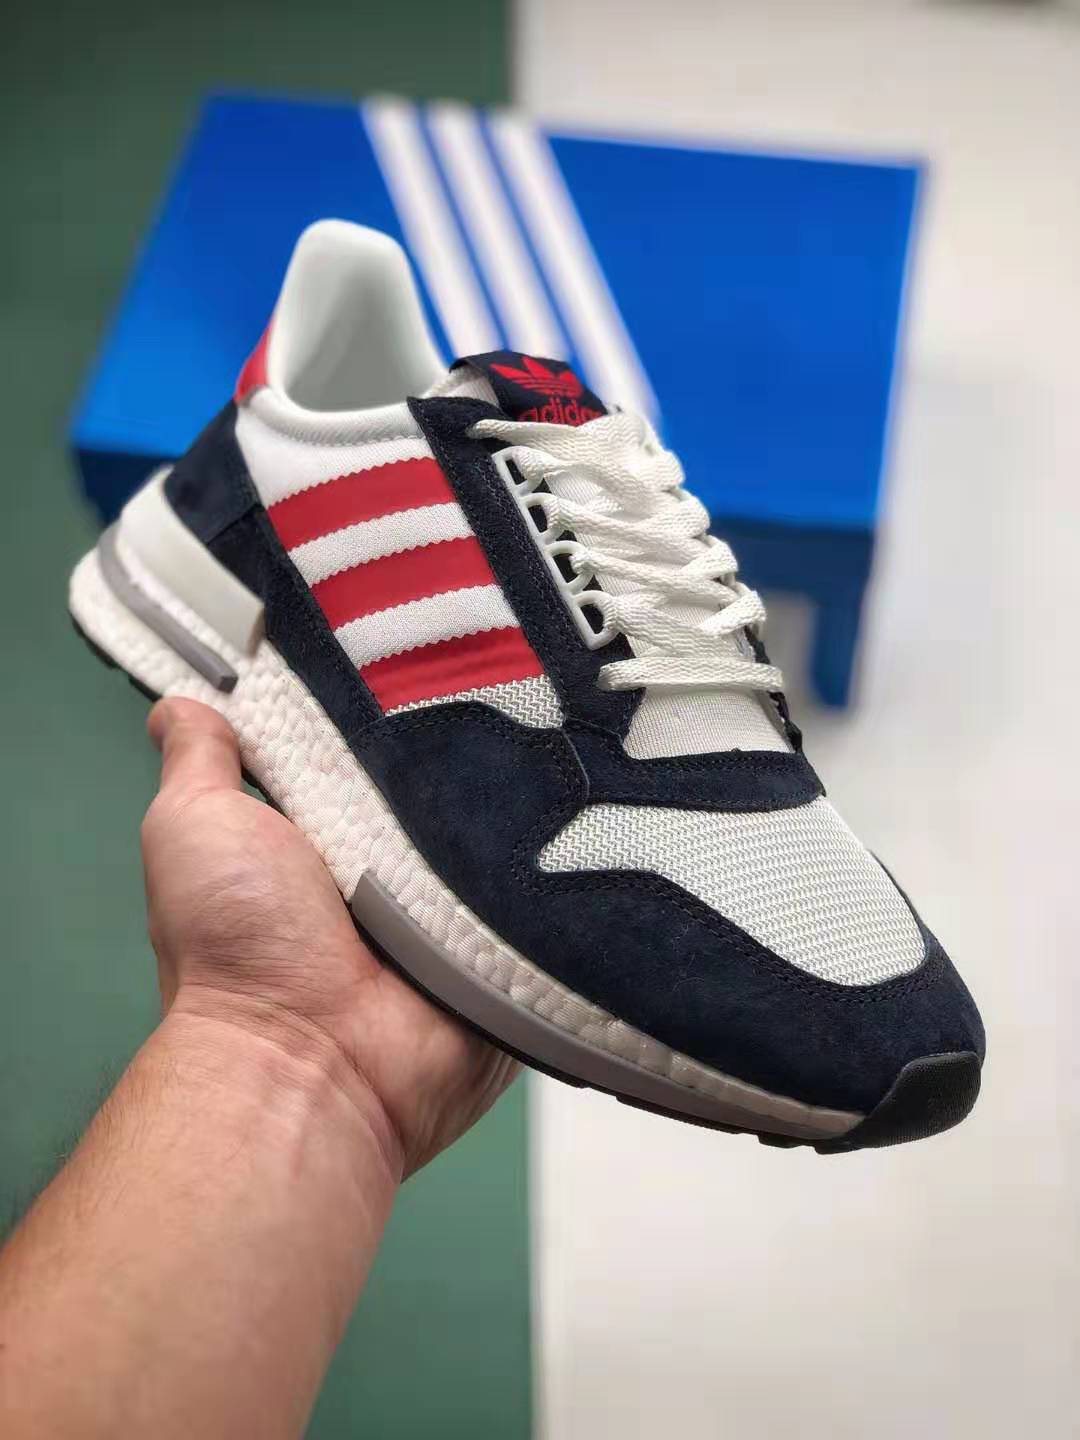 Adidas ZX500 RM Boost F36912 | Stylish & Comfortable Sneakers